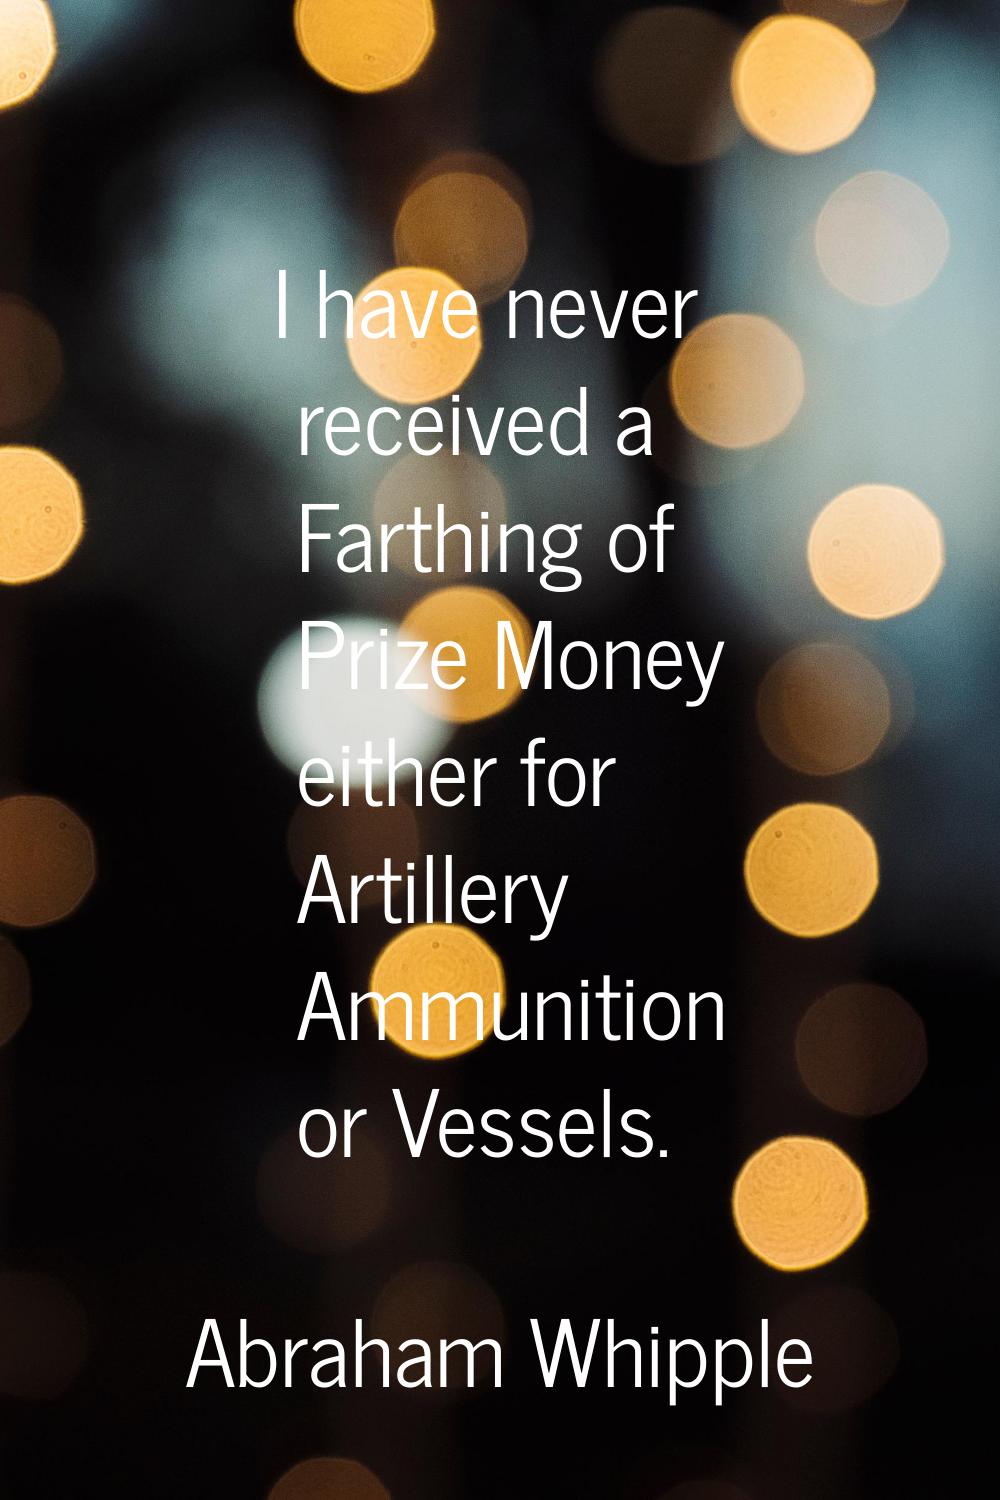 I have never received a Farthing of Prize Money either for Artillery Ammunition or Vessels.